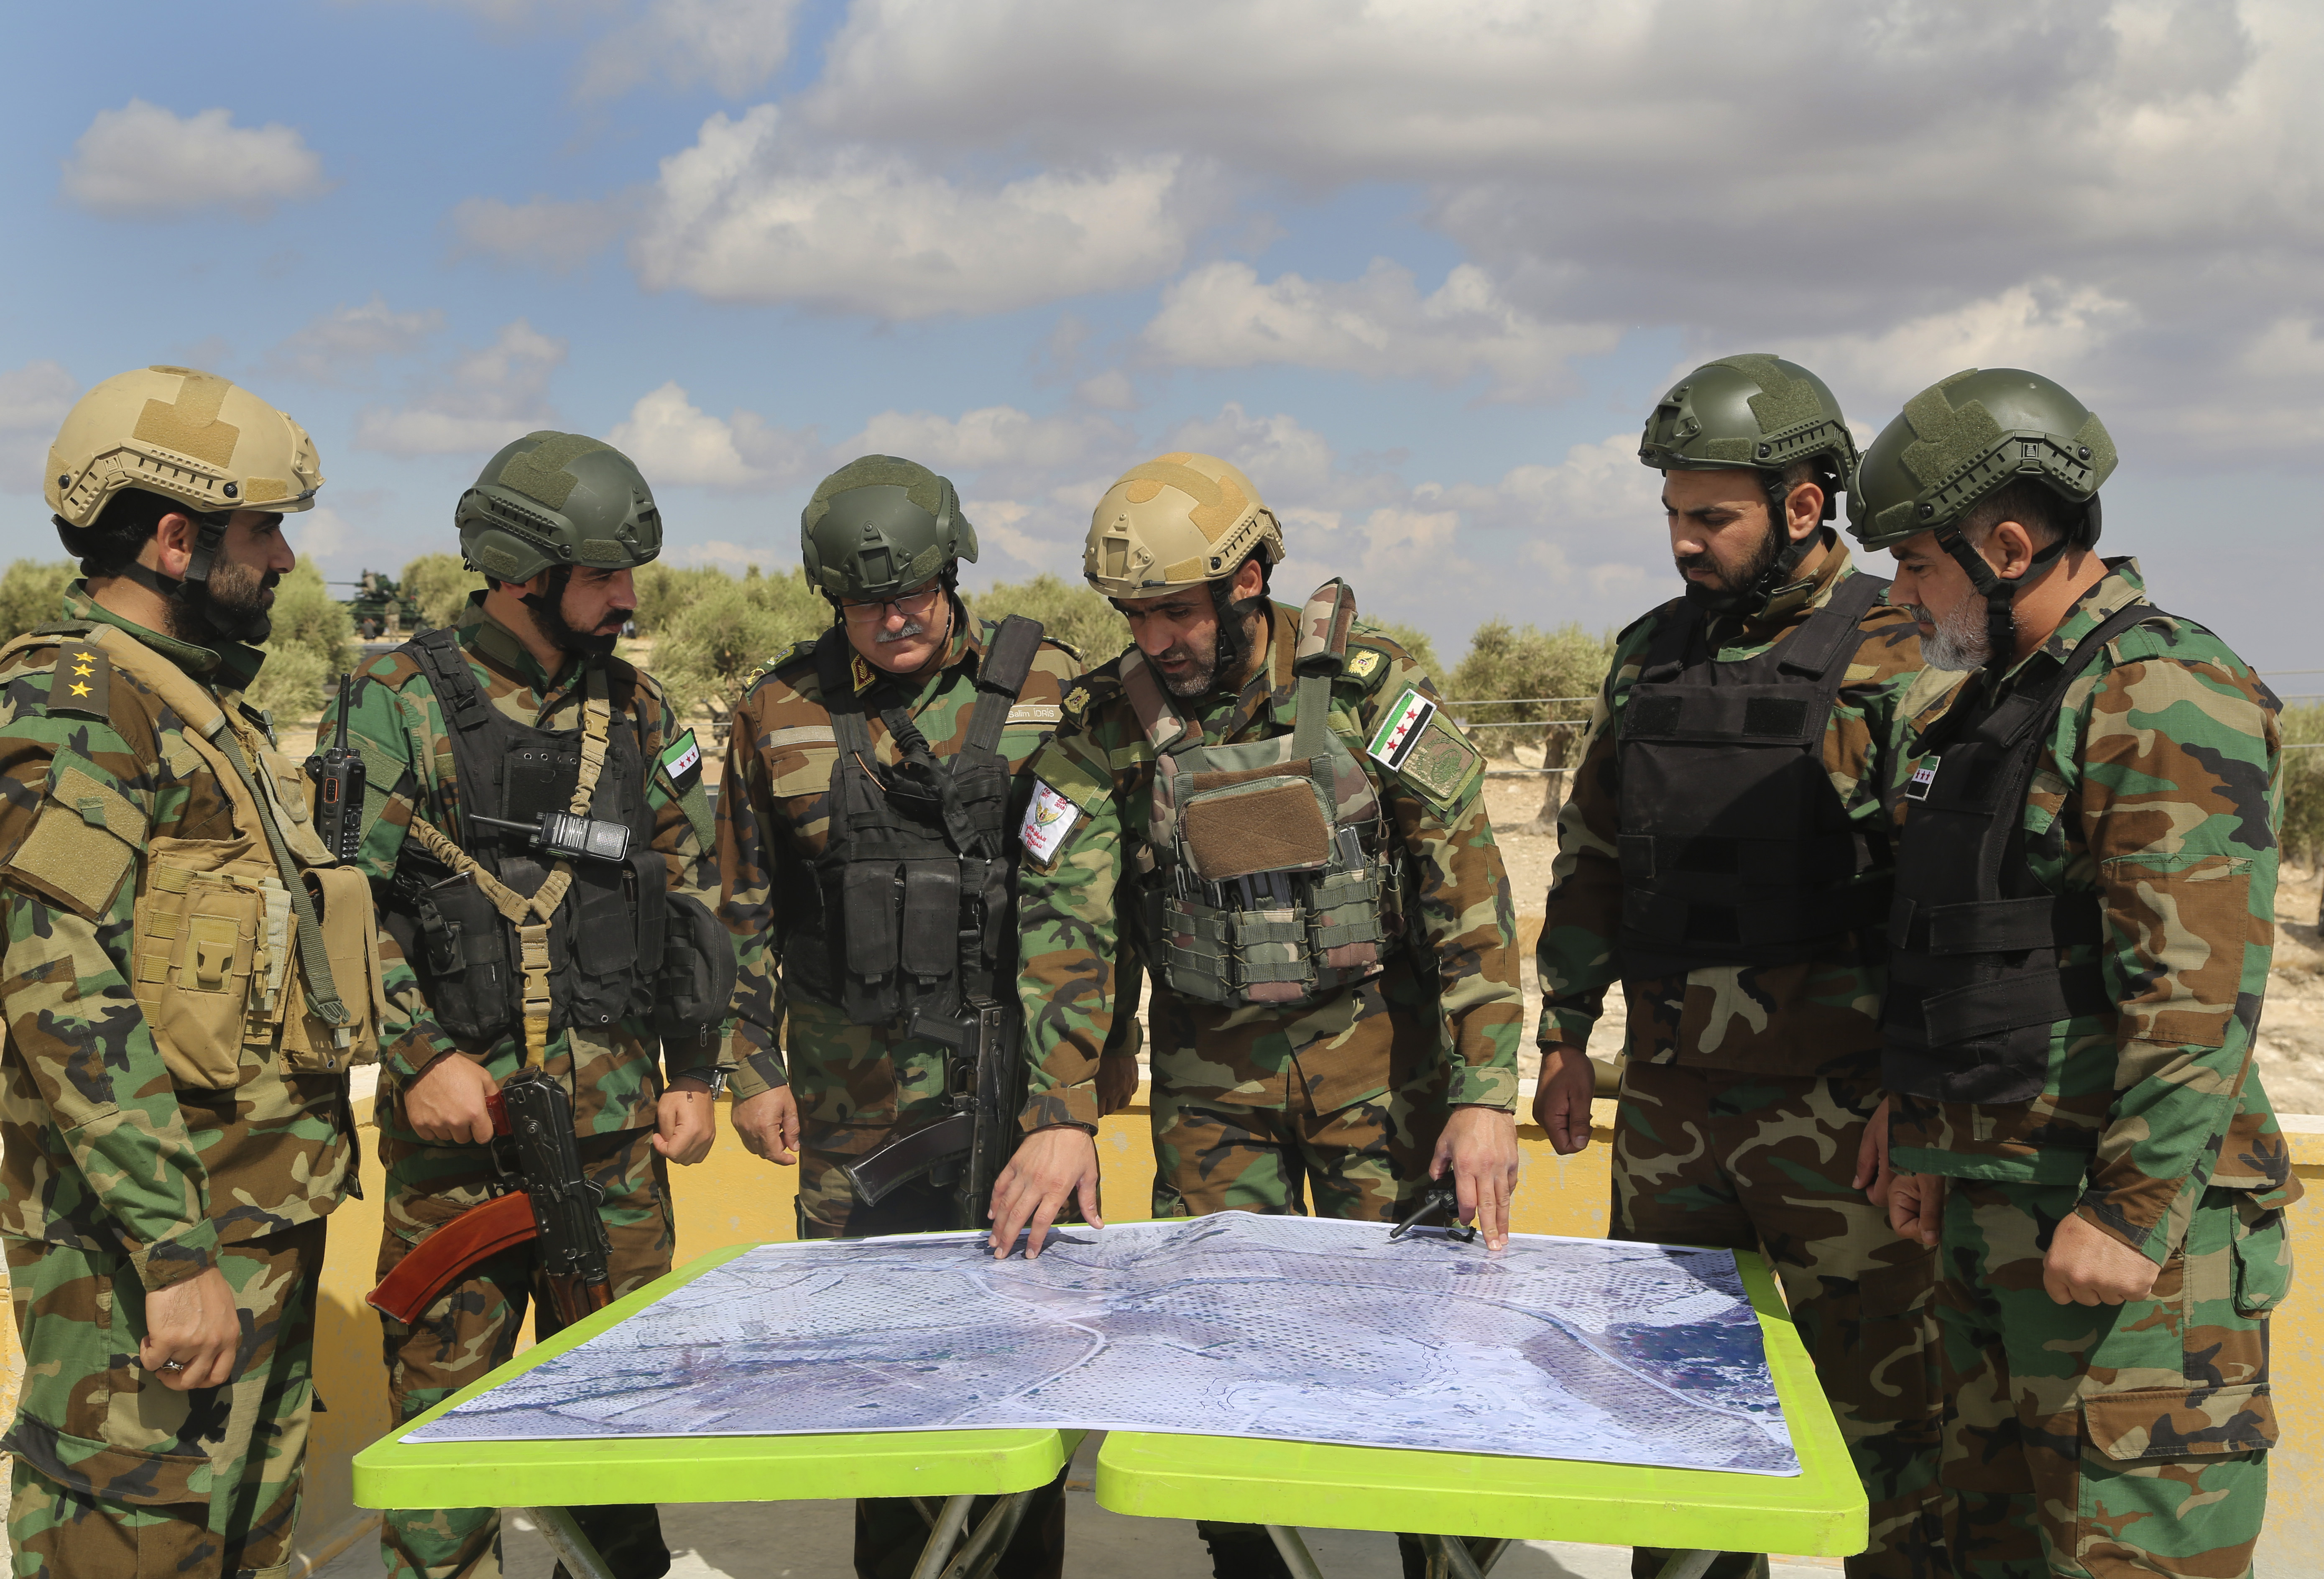 FILE - In this Monday Oct. 7, 2019 file photo, Turkish-backed forces from the Free Syrian Army look at a map during military maneuvers in preparation for a Turkish incursion targeting Syrian Kurdish fighters, near Azaz, north Syria. The Turkish trained and funded Syrian forces present themselves as heirs to the uprising against President Bashar Assad. But while they include some Islamist and former rebel factions, a large number are Arab and Turkmen fighters from northern and eastern Syria with an ax to grind against the Kurds and a reputation for violence and looting. (AP Photo, File)